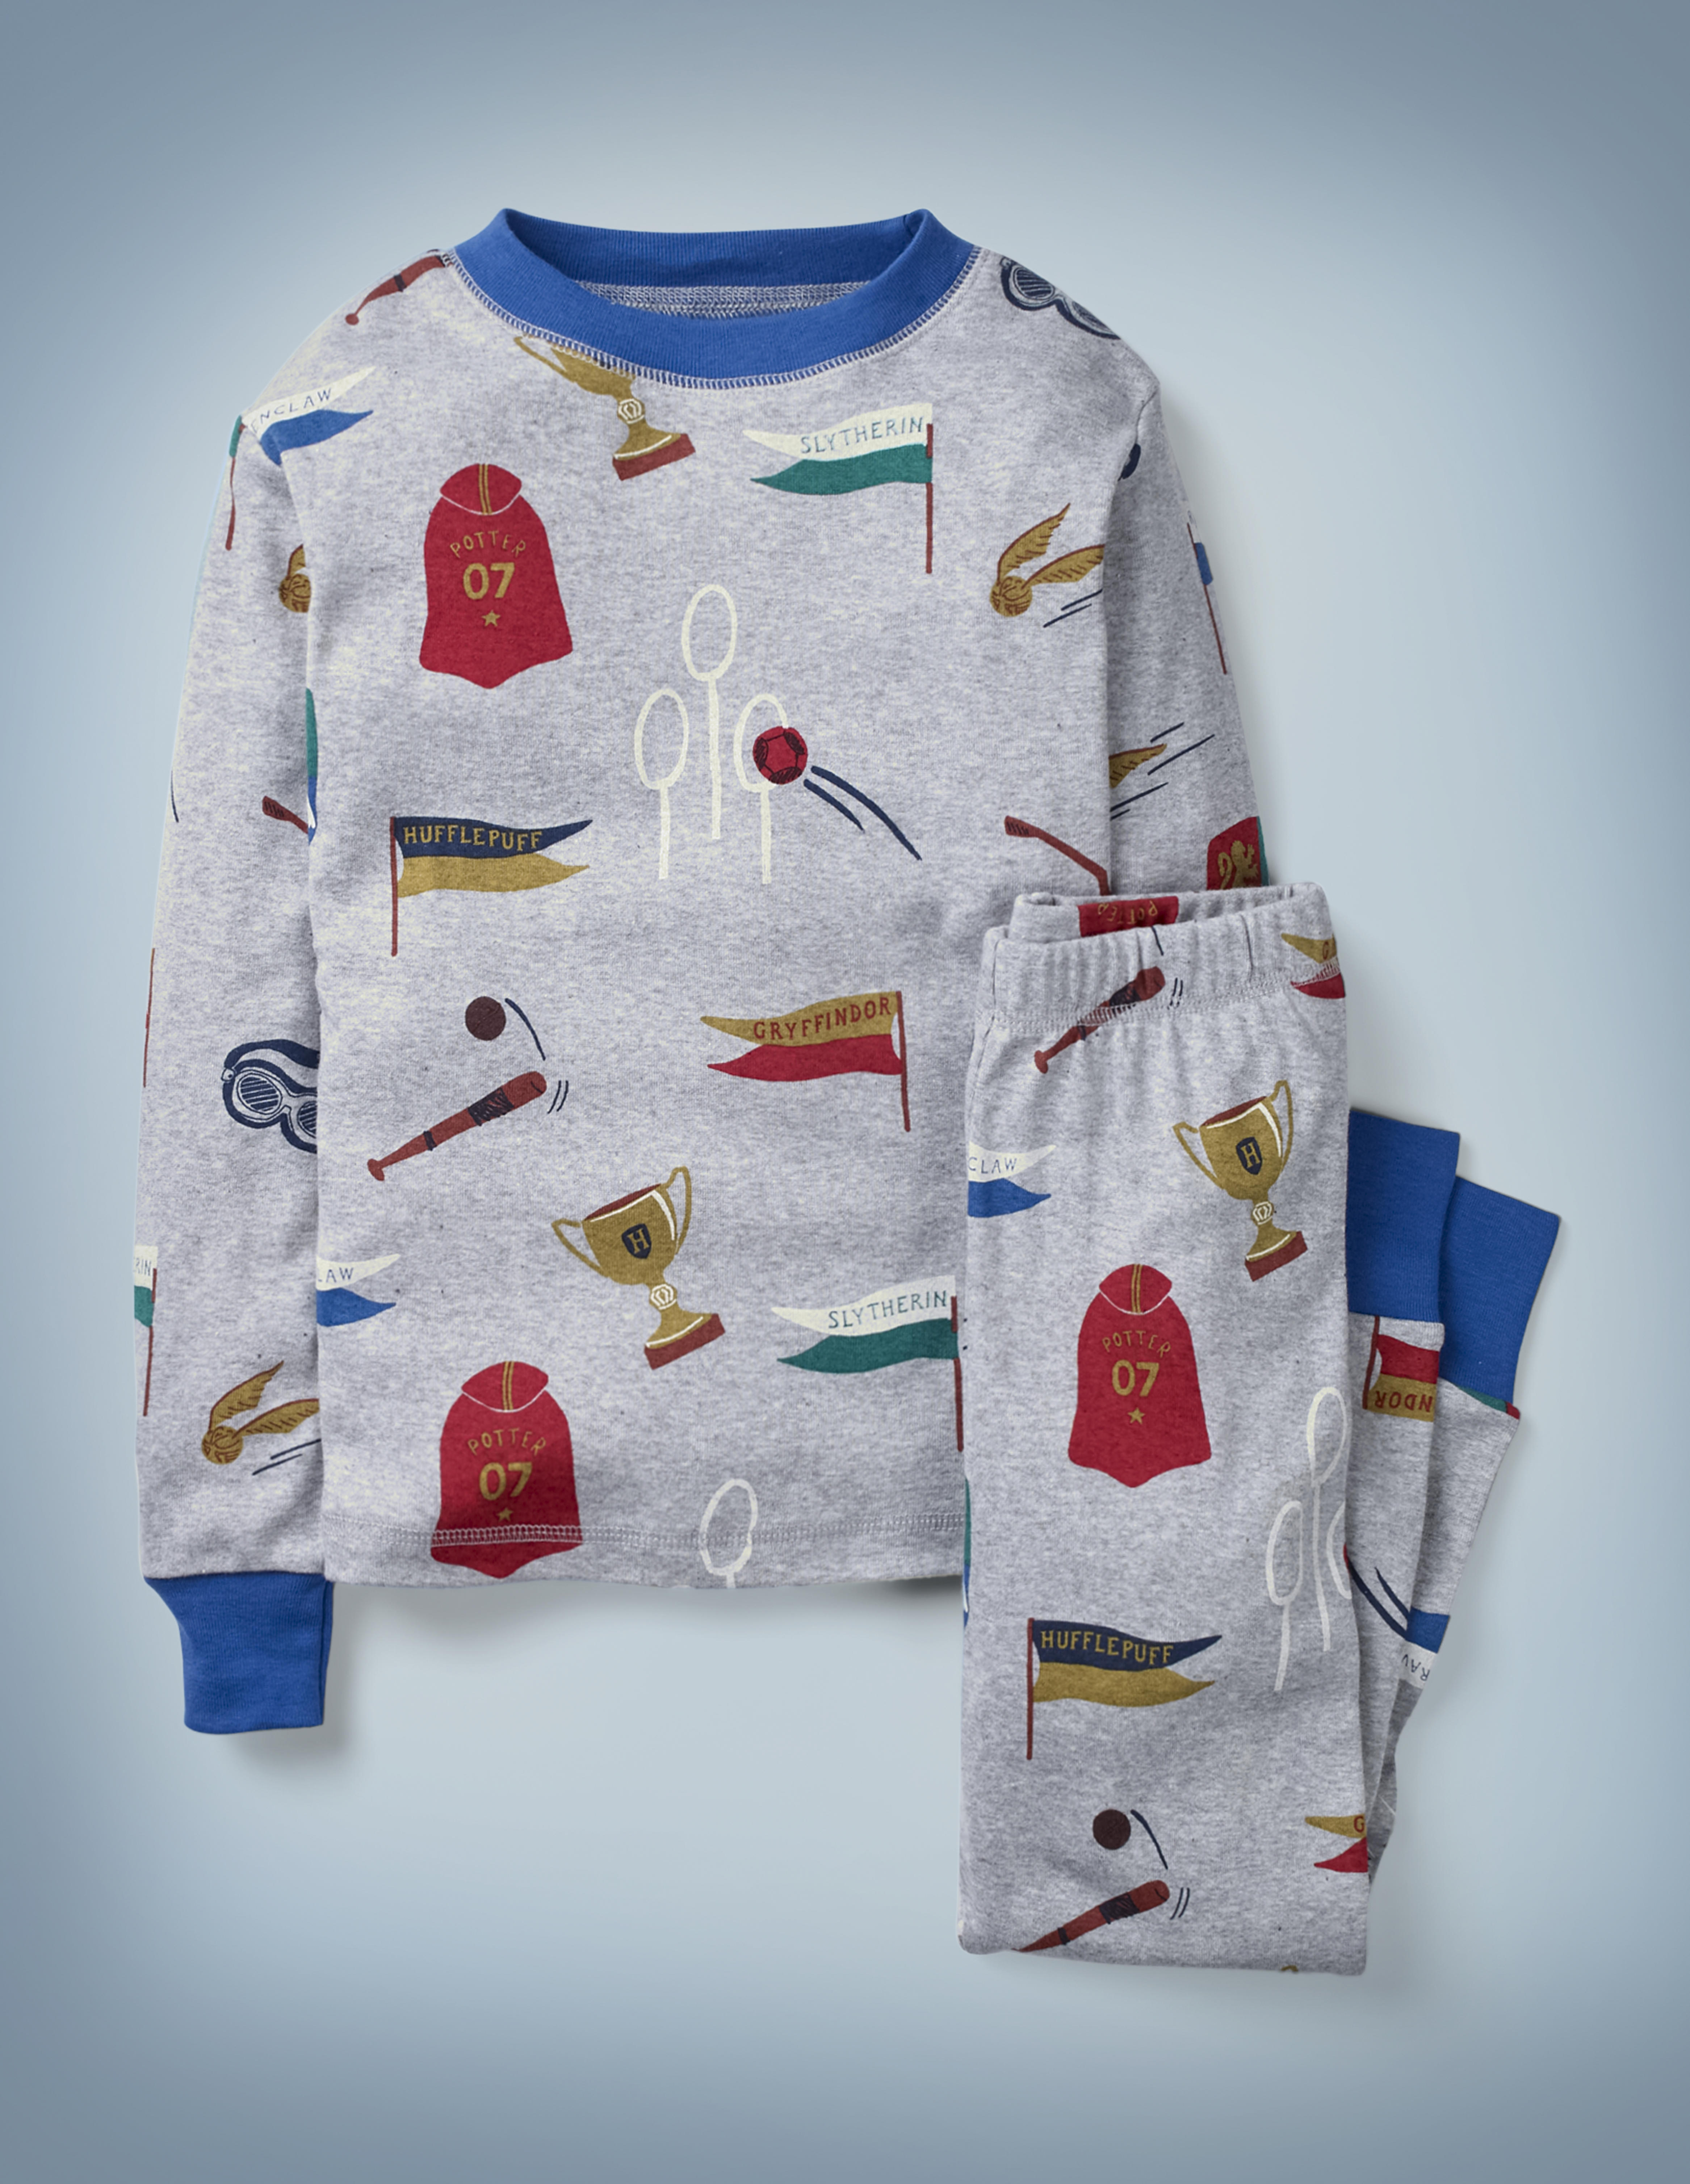 The Mini Boden Harry Potter Long John Pyjamas in gray feature all-over images of Quidditch-related items, including a Quaffle flying through the hoop, a Golden Snitch, a Quidditch Cup, and more. The top-and-bottom set retails at £24.